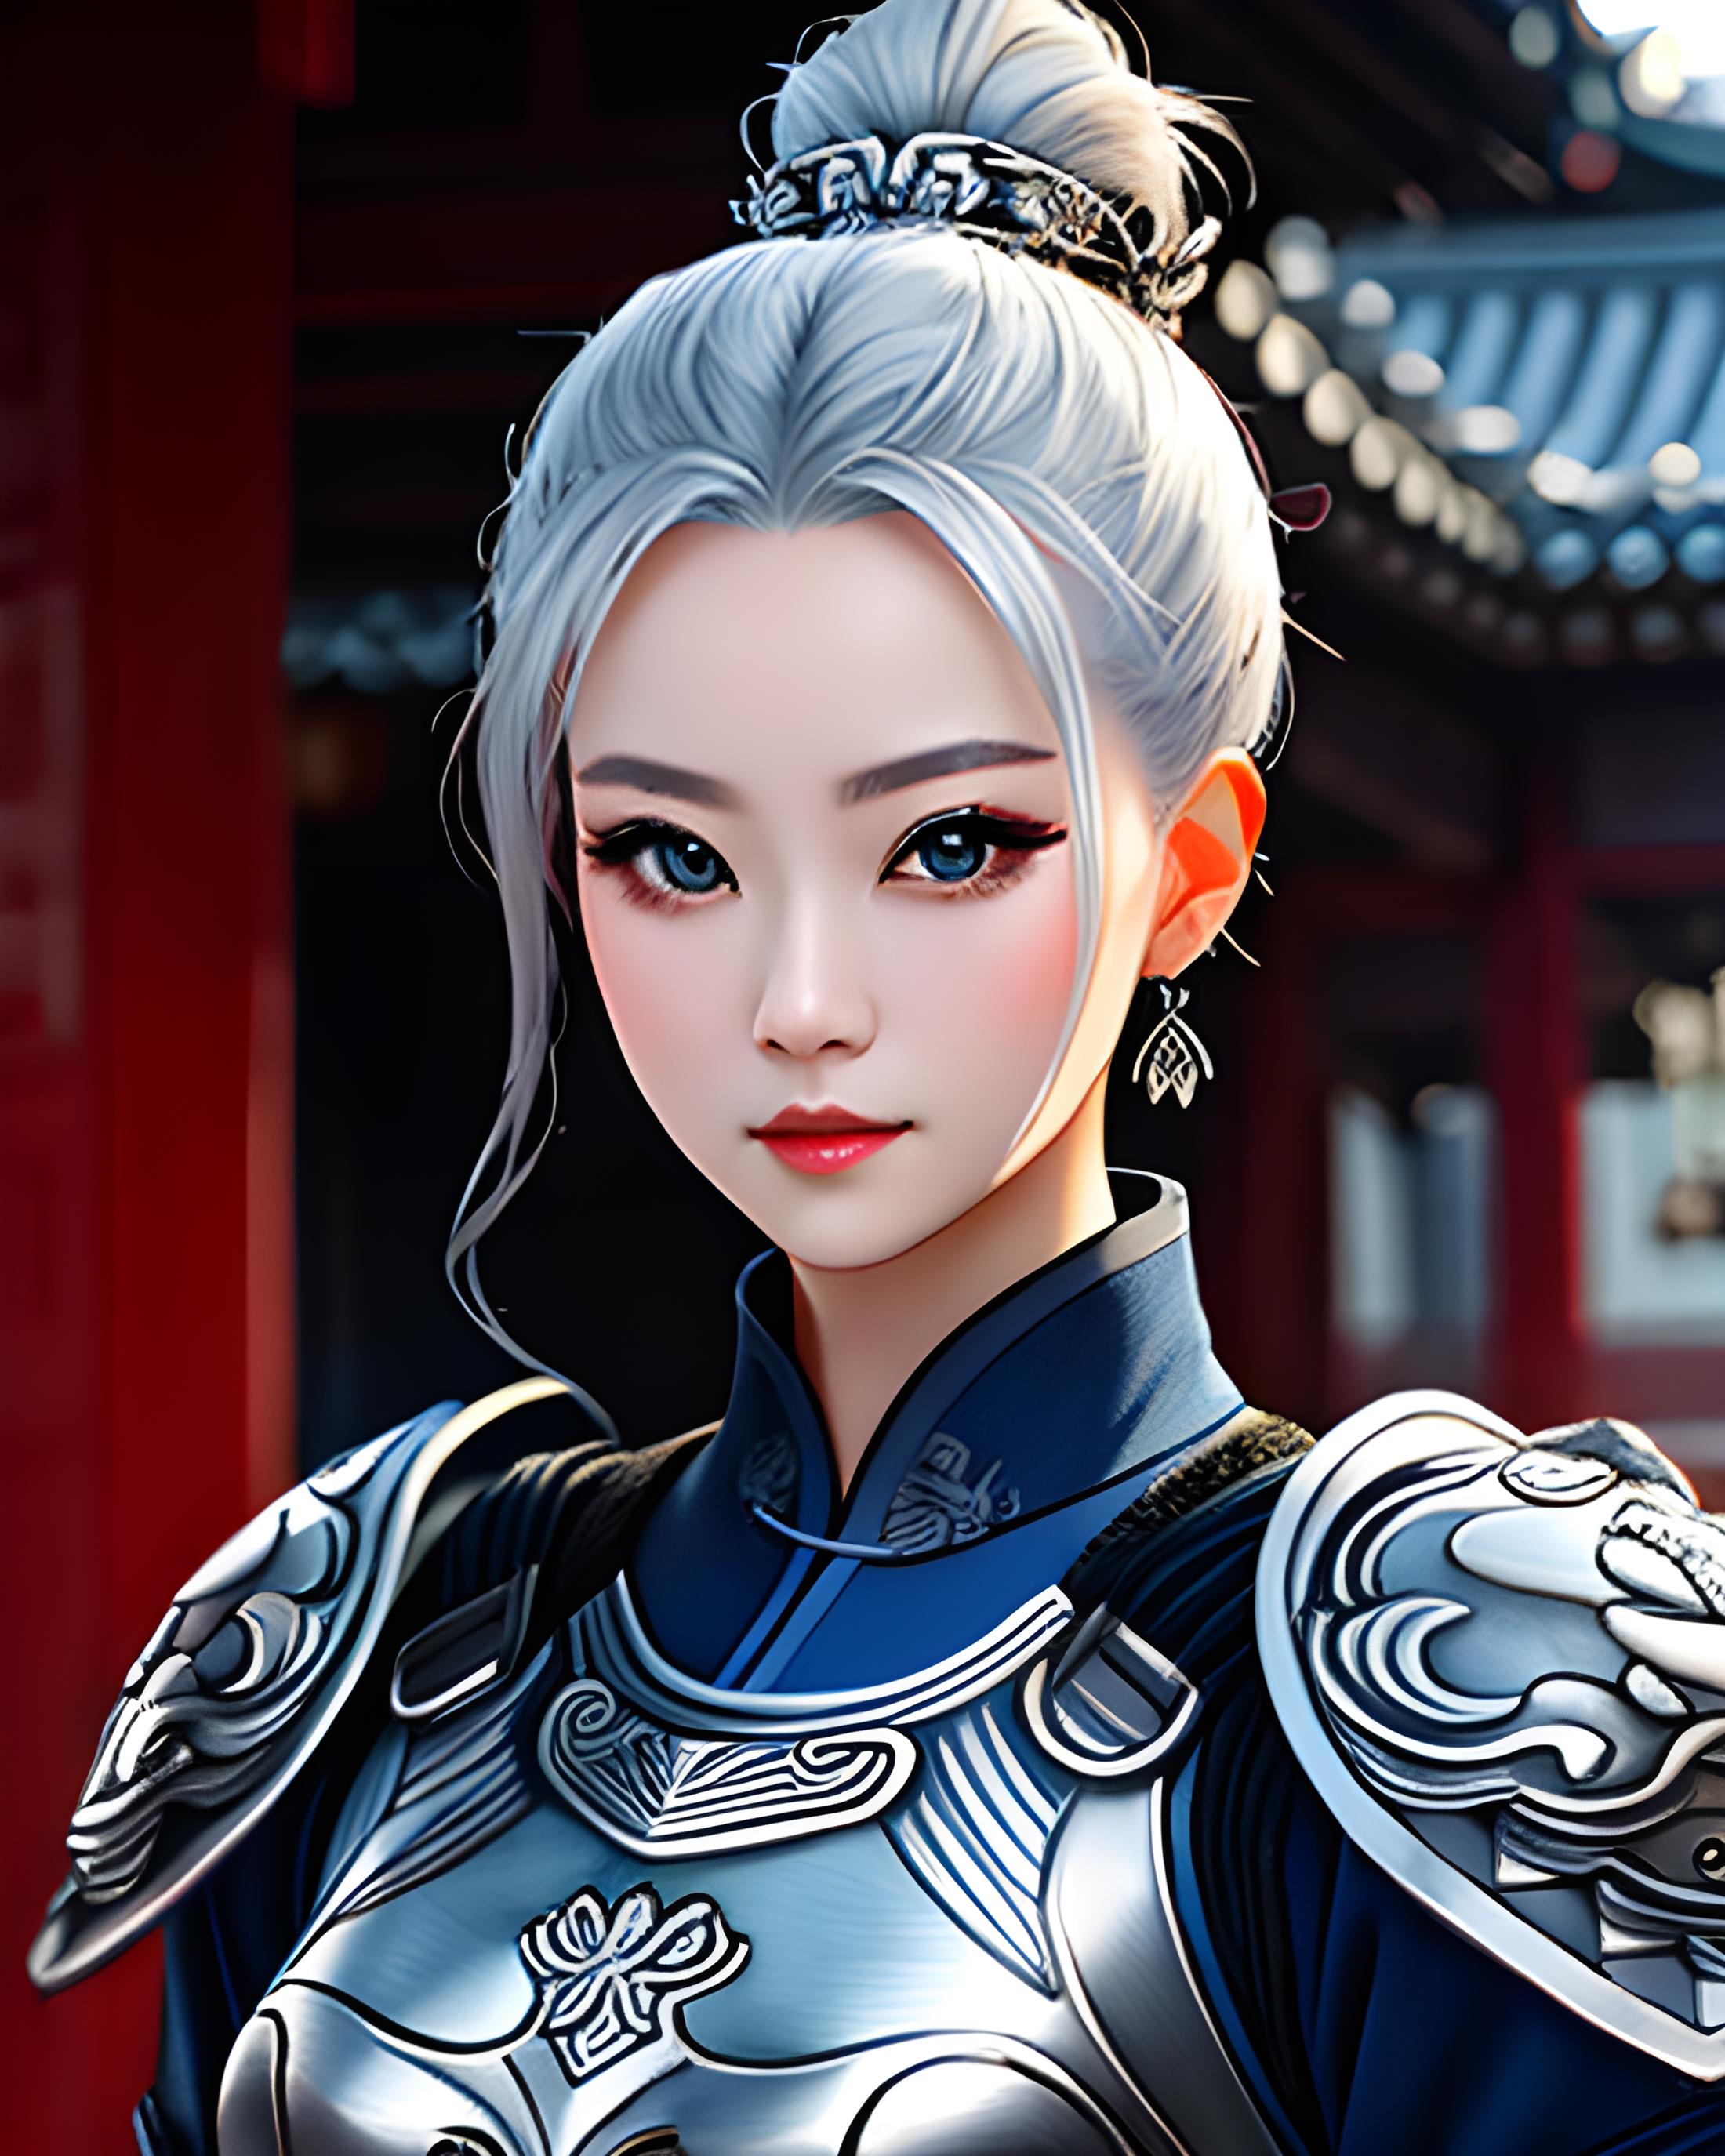 Chinese Female General - Battle Armor image by KimiKoro